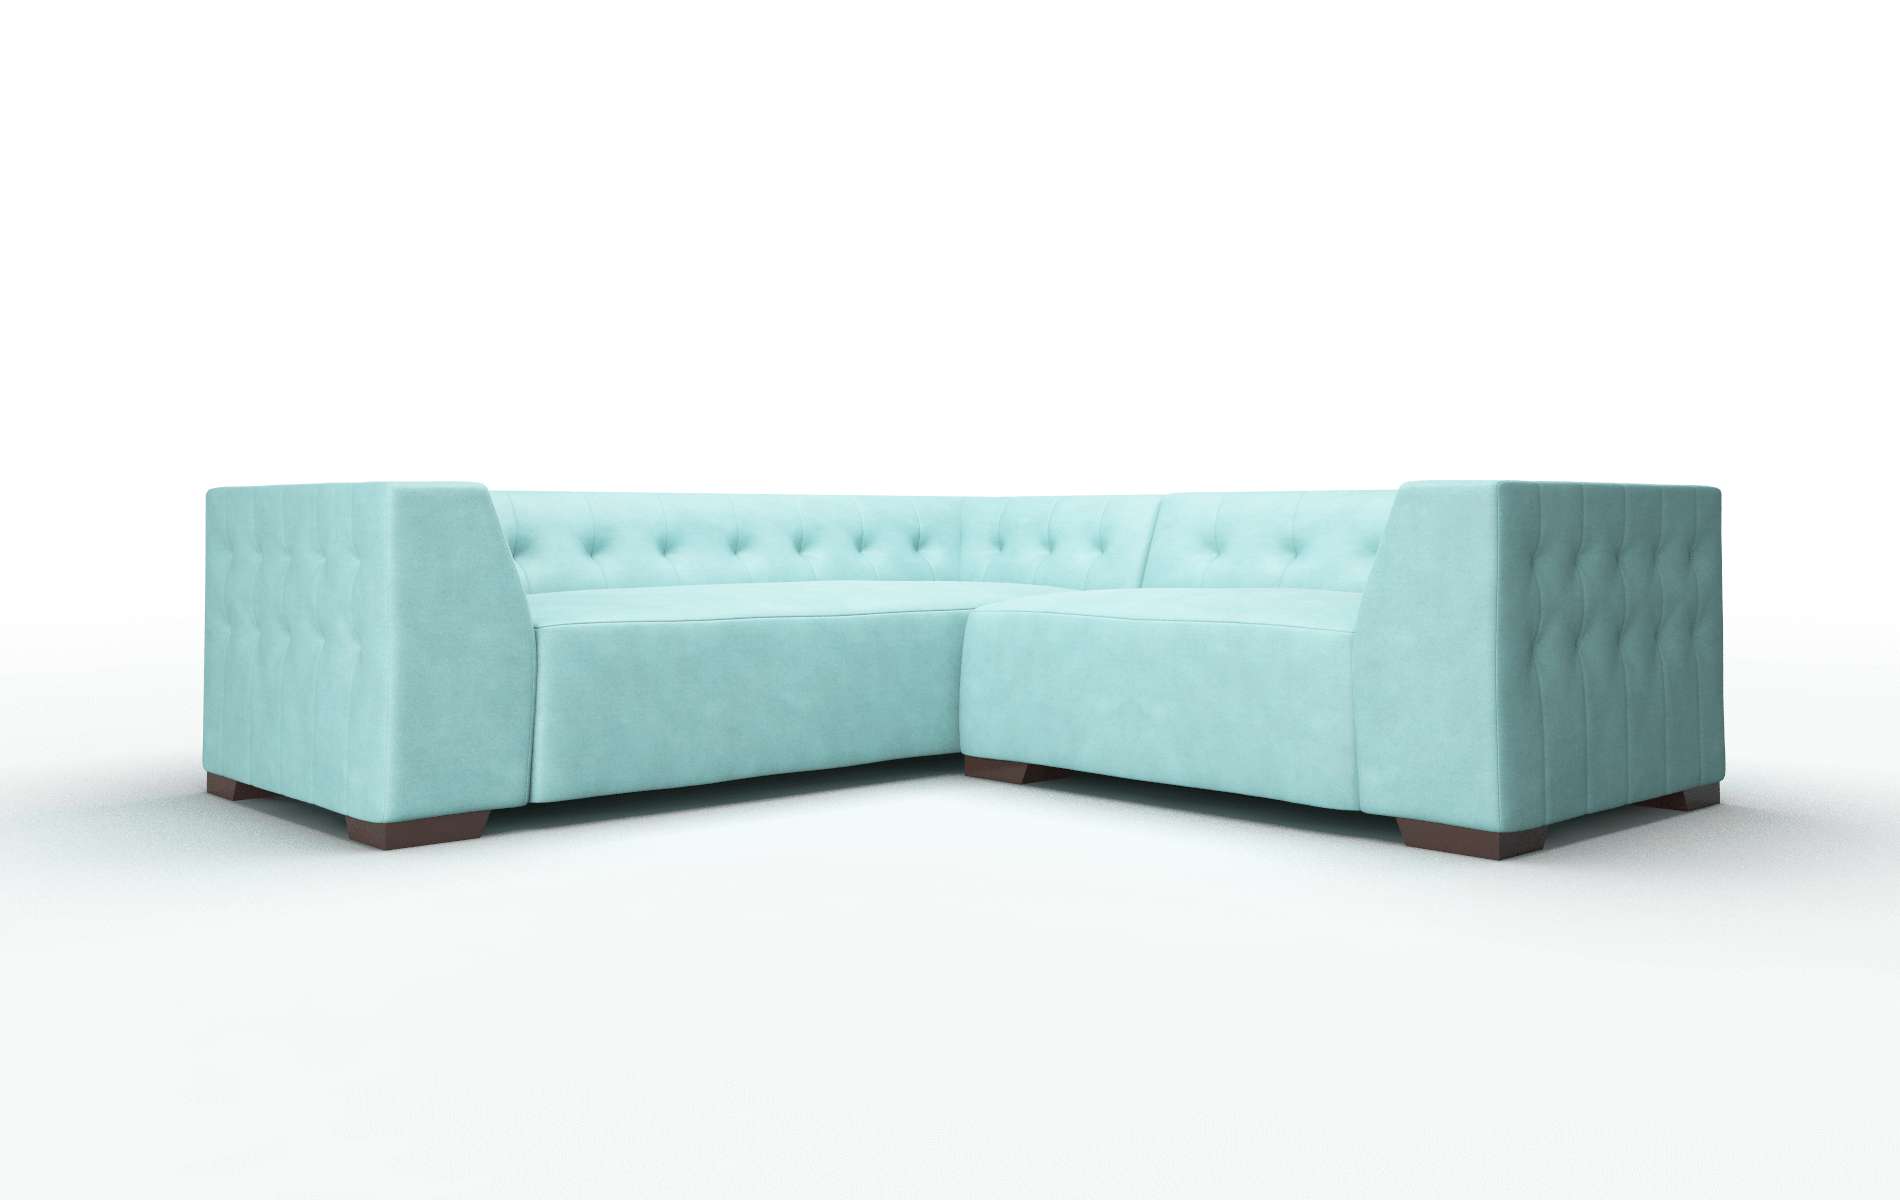 Palermo Curious Turquoise chair espresso legs